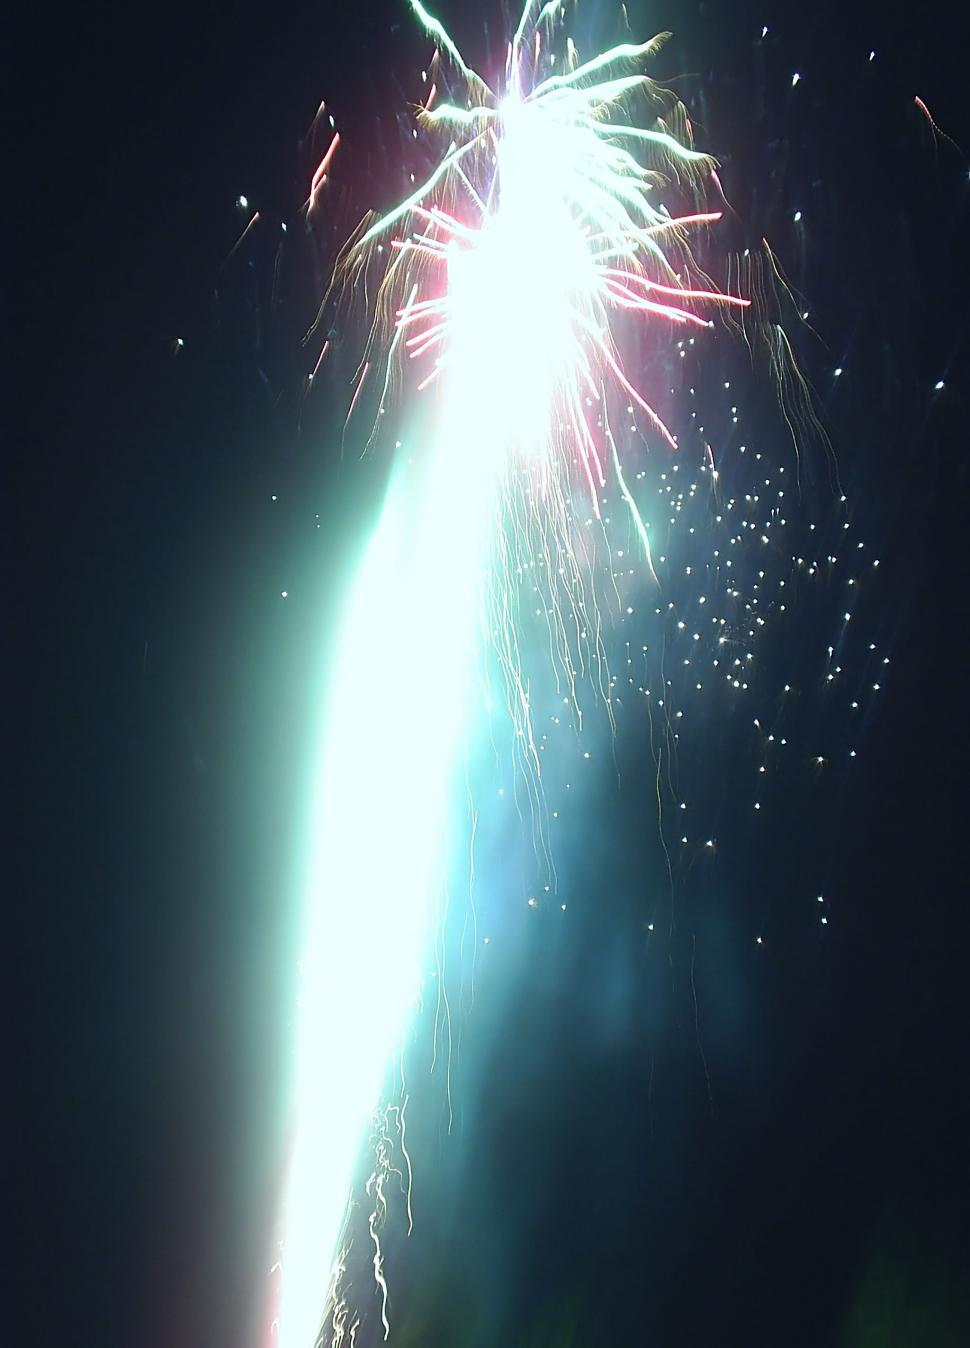 Free Image of Fireworks over the night sky 